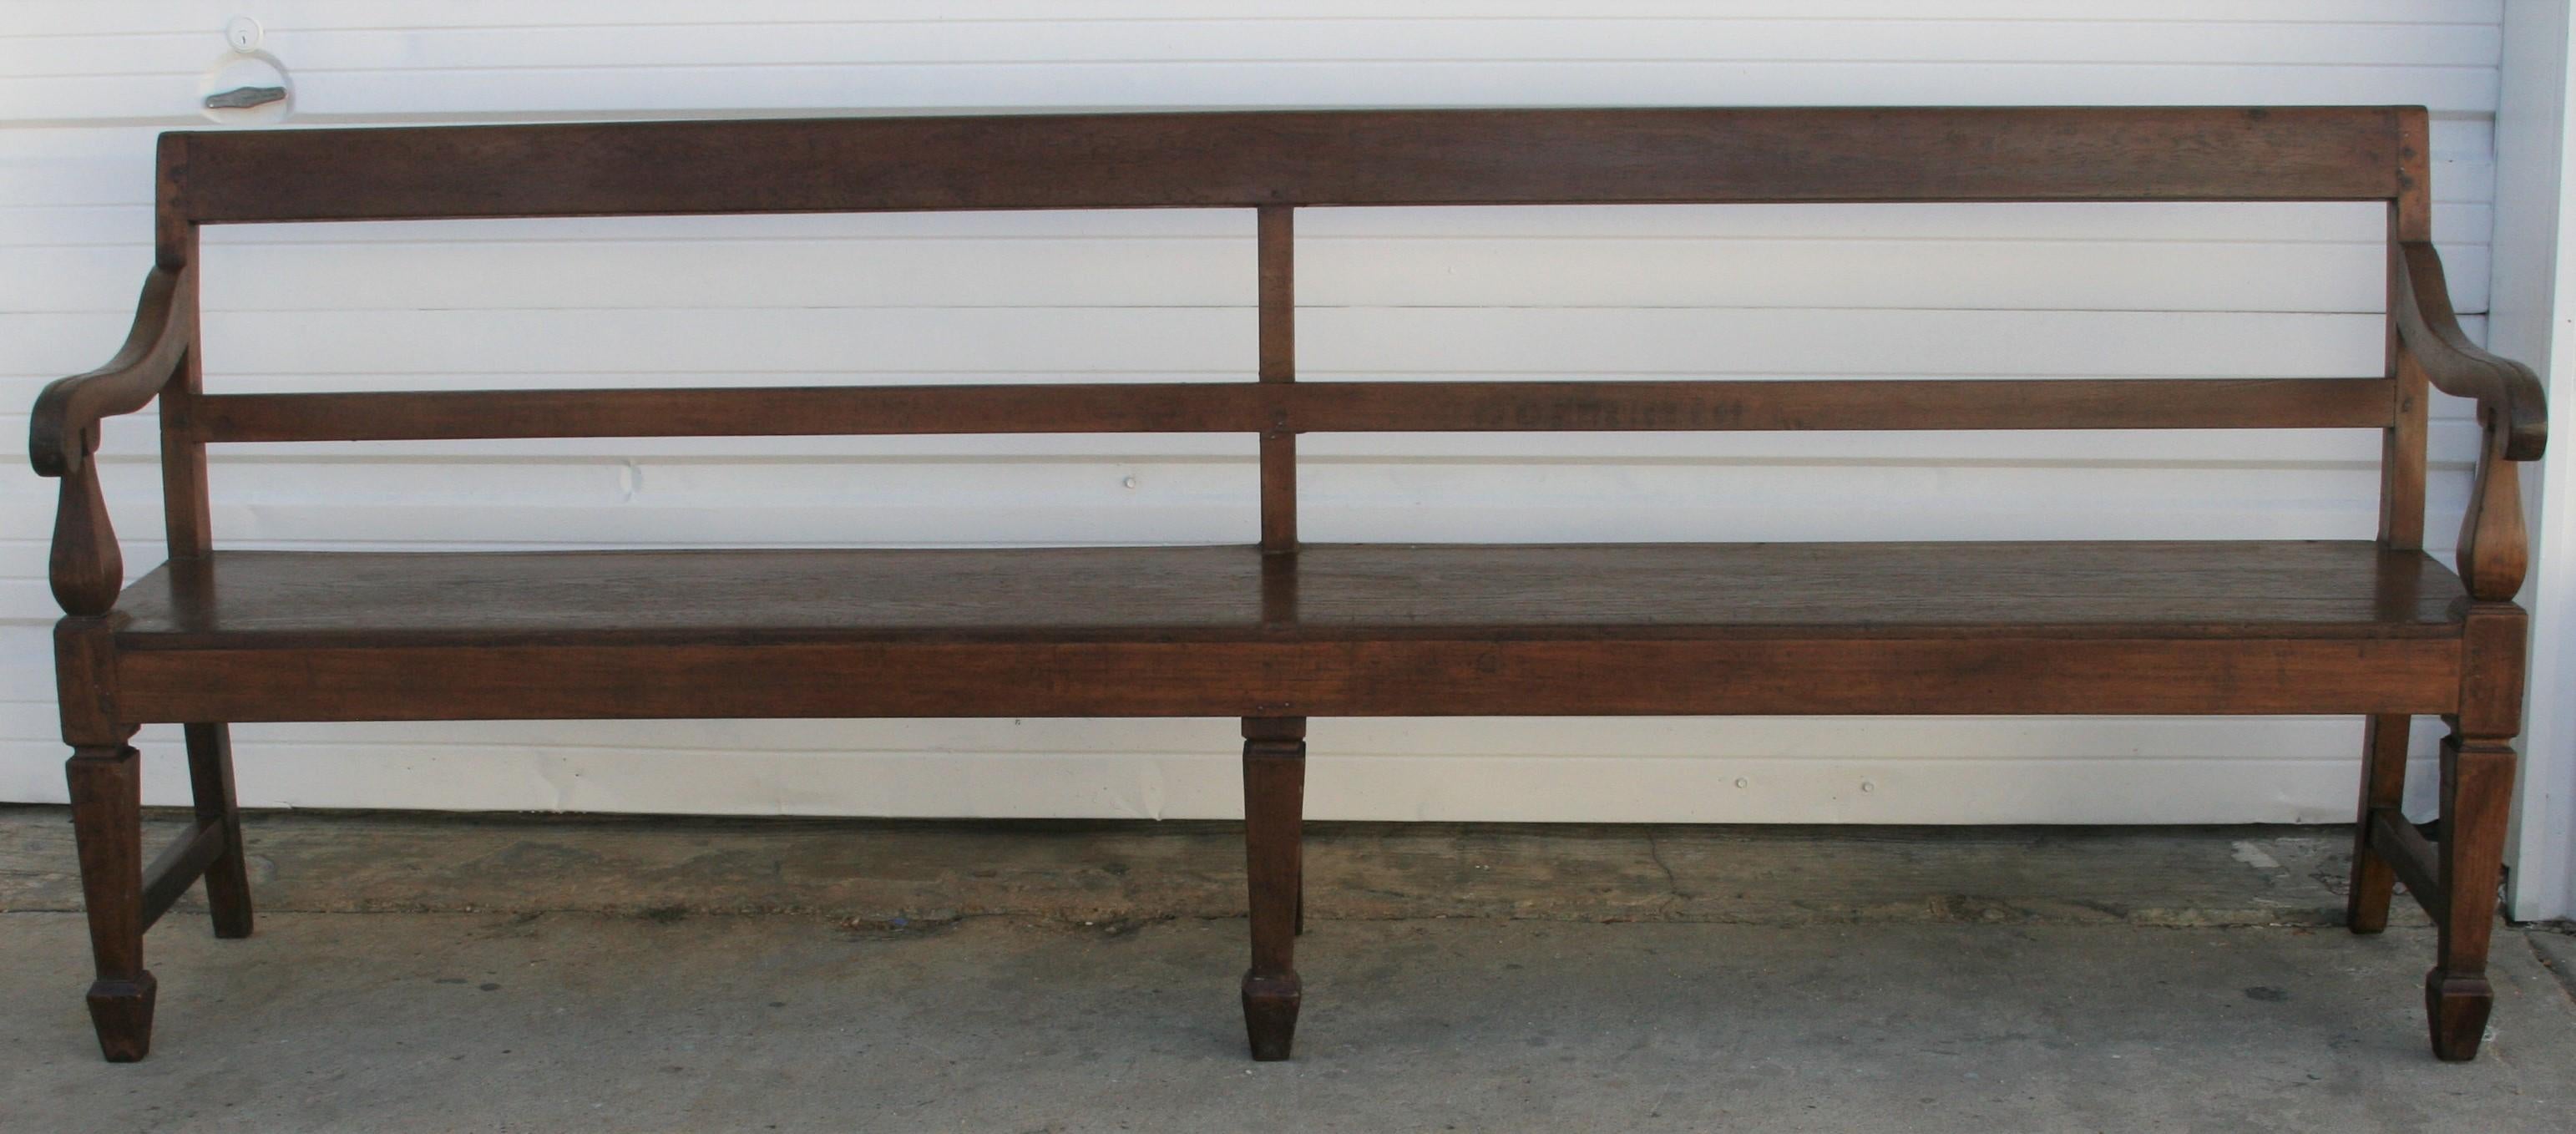 The first thing that catches the eyes when you look at this bench is the mellowing wood patina of the aging teak wood. It is a large bench with a seat almost made from one plank of wood with hand rests on either side with plain back and supported on